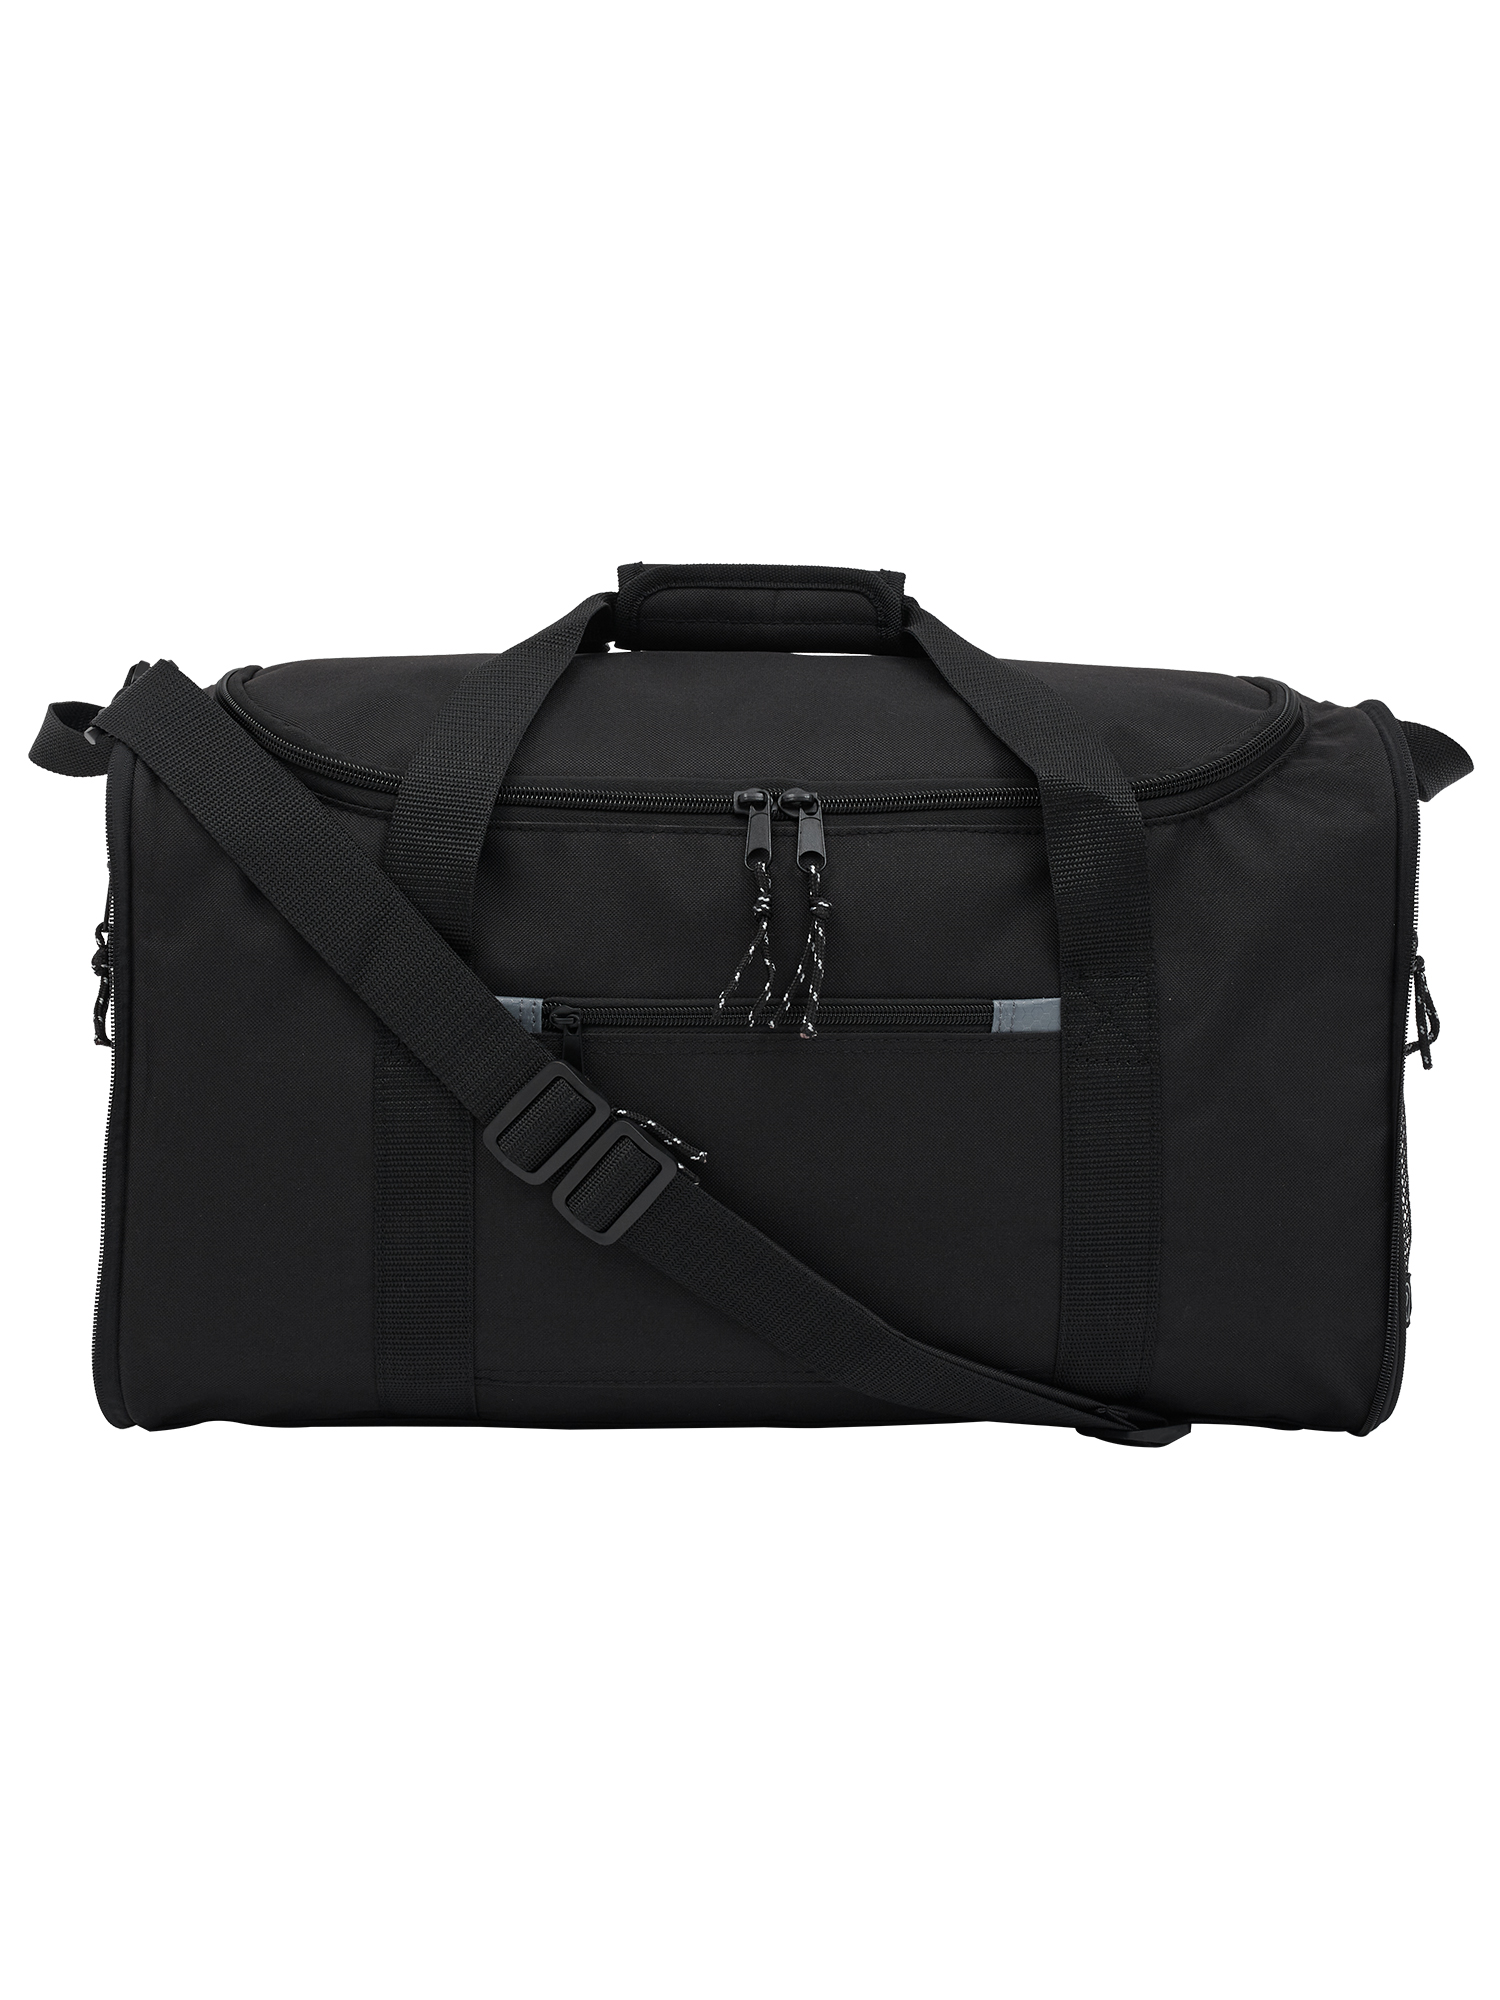 Protégé 20" Collapsible Sport and Travel Duffel Bag, Black - image 1 of 9